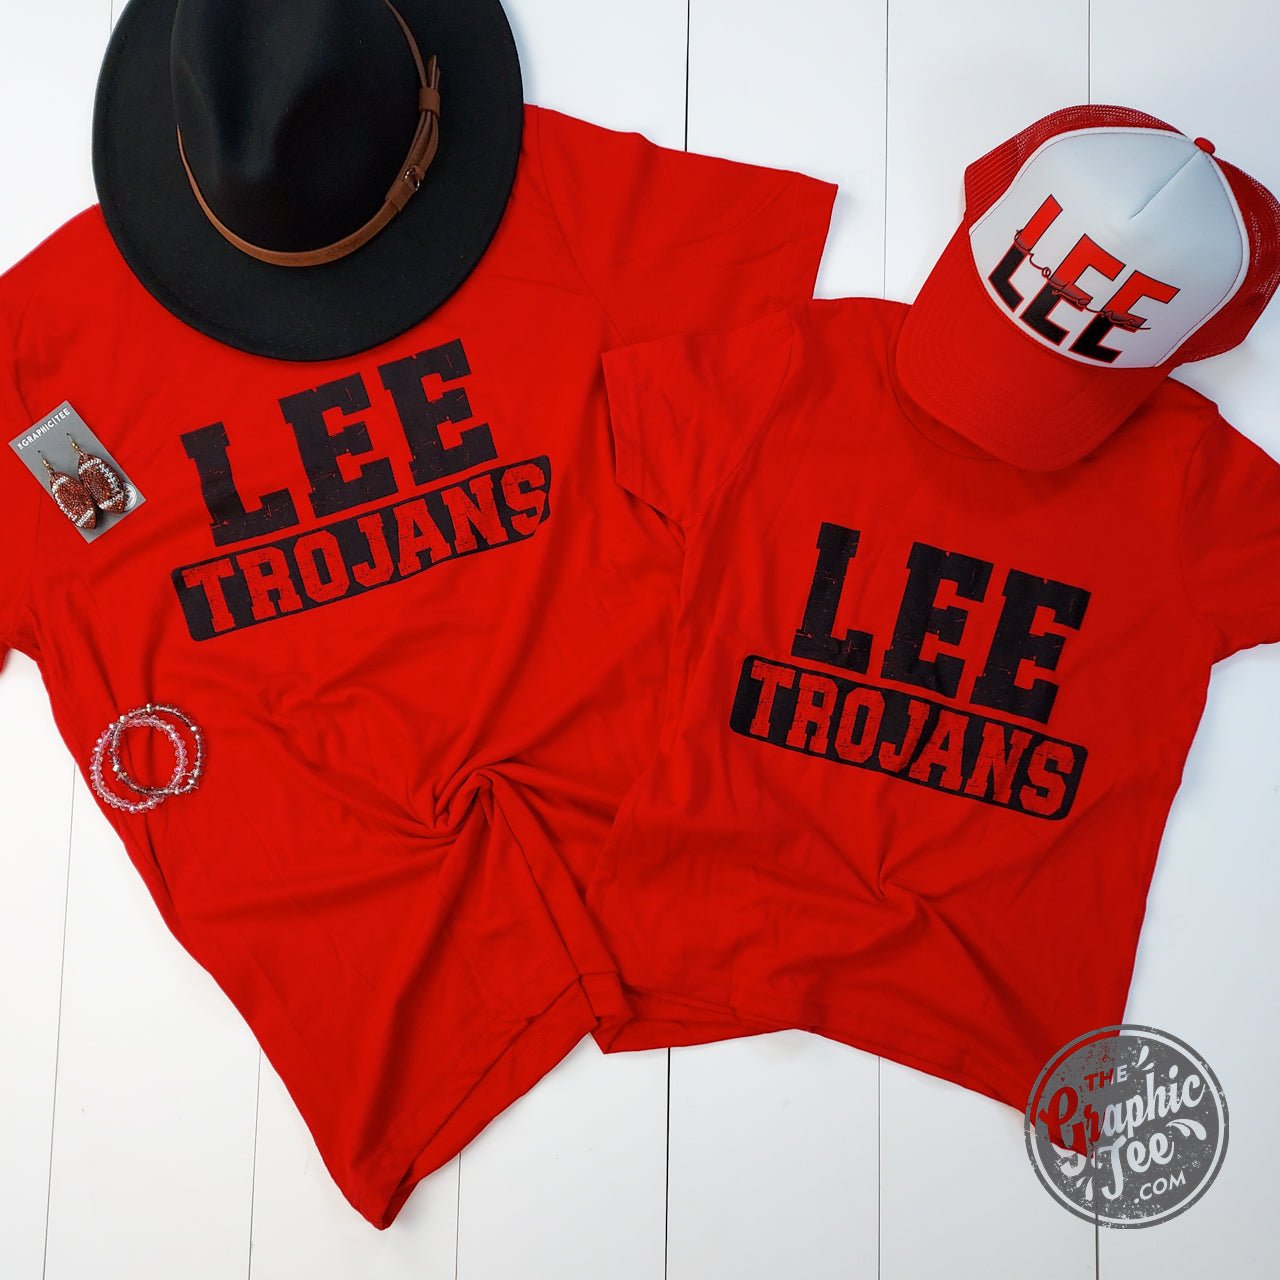 Lee Trojans Red Short Sleeve YOUTH Tee - The Graphic Tee